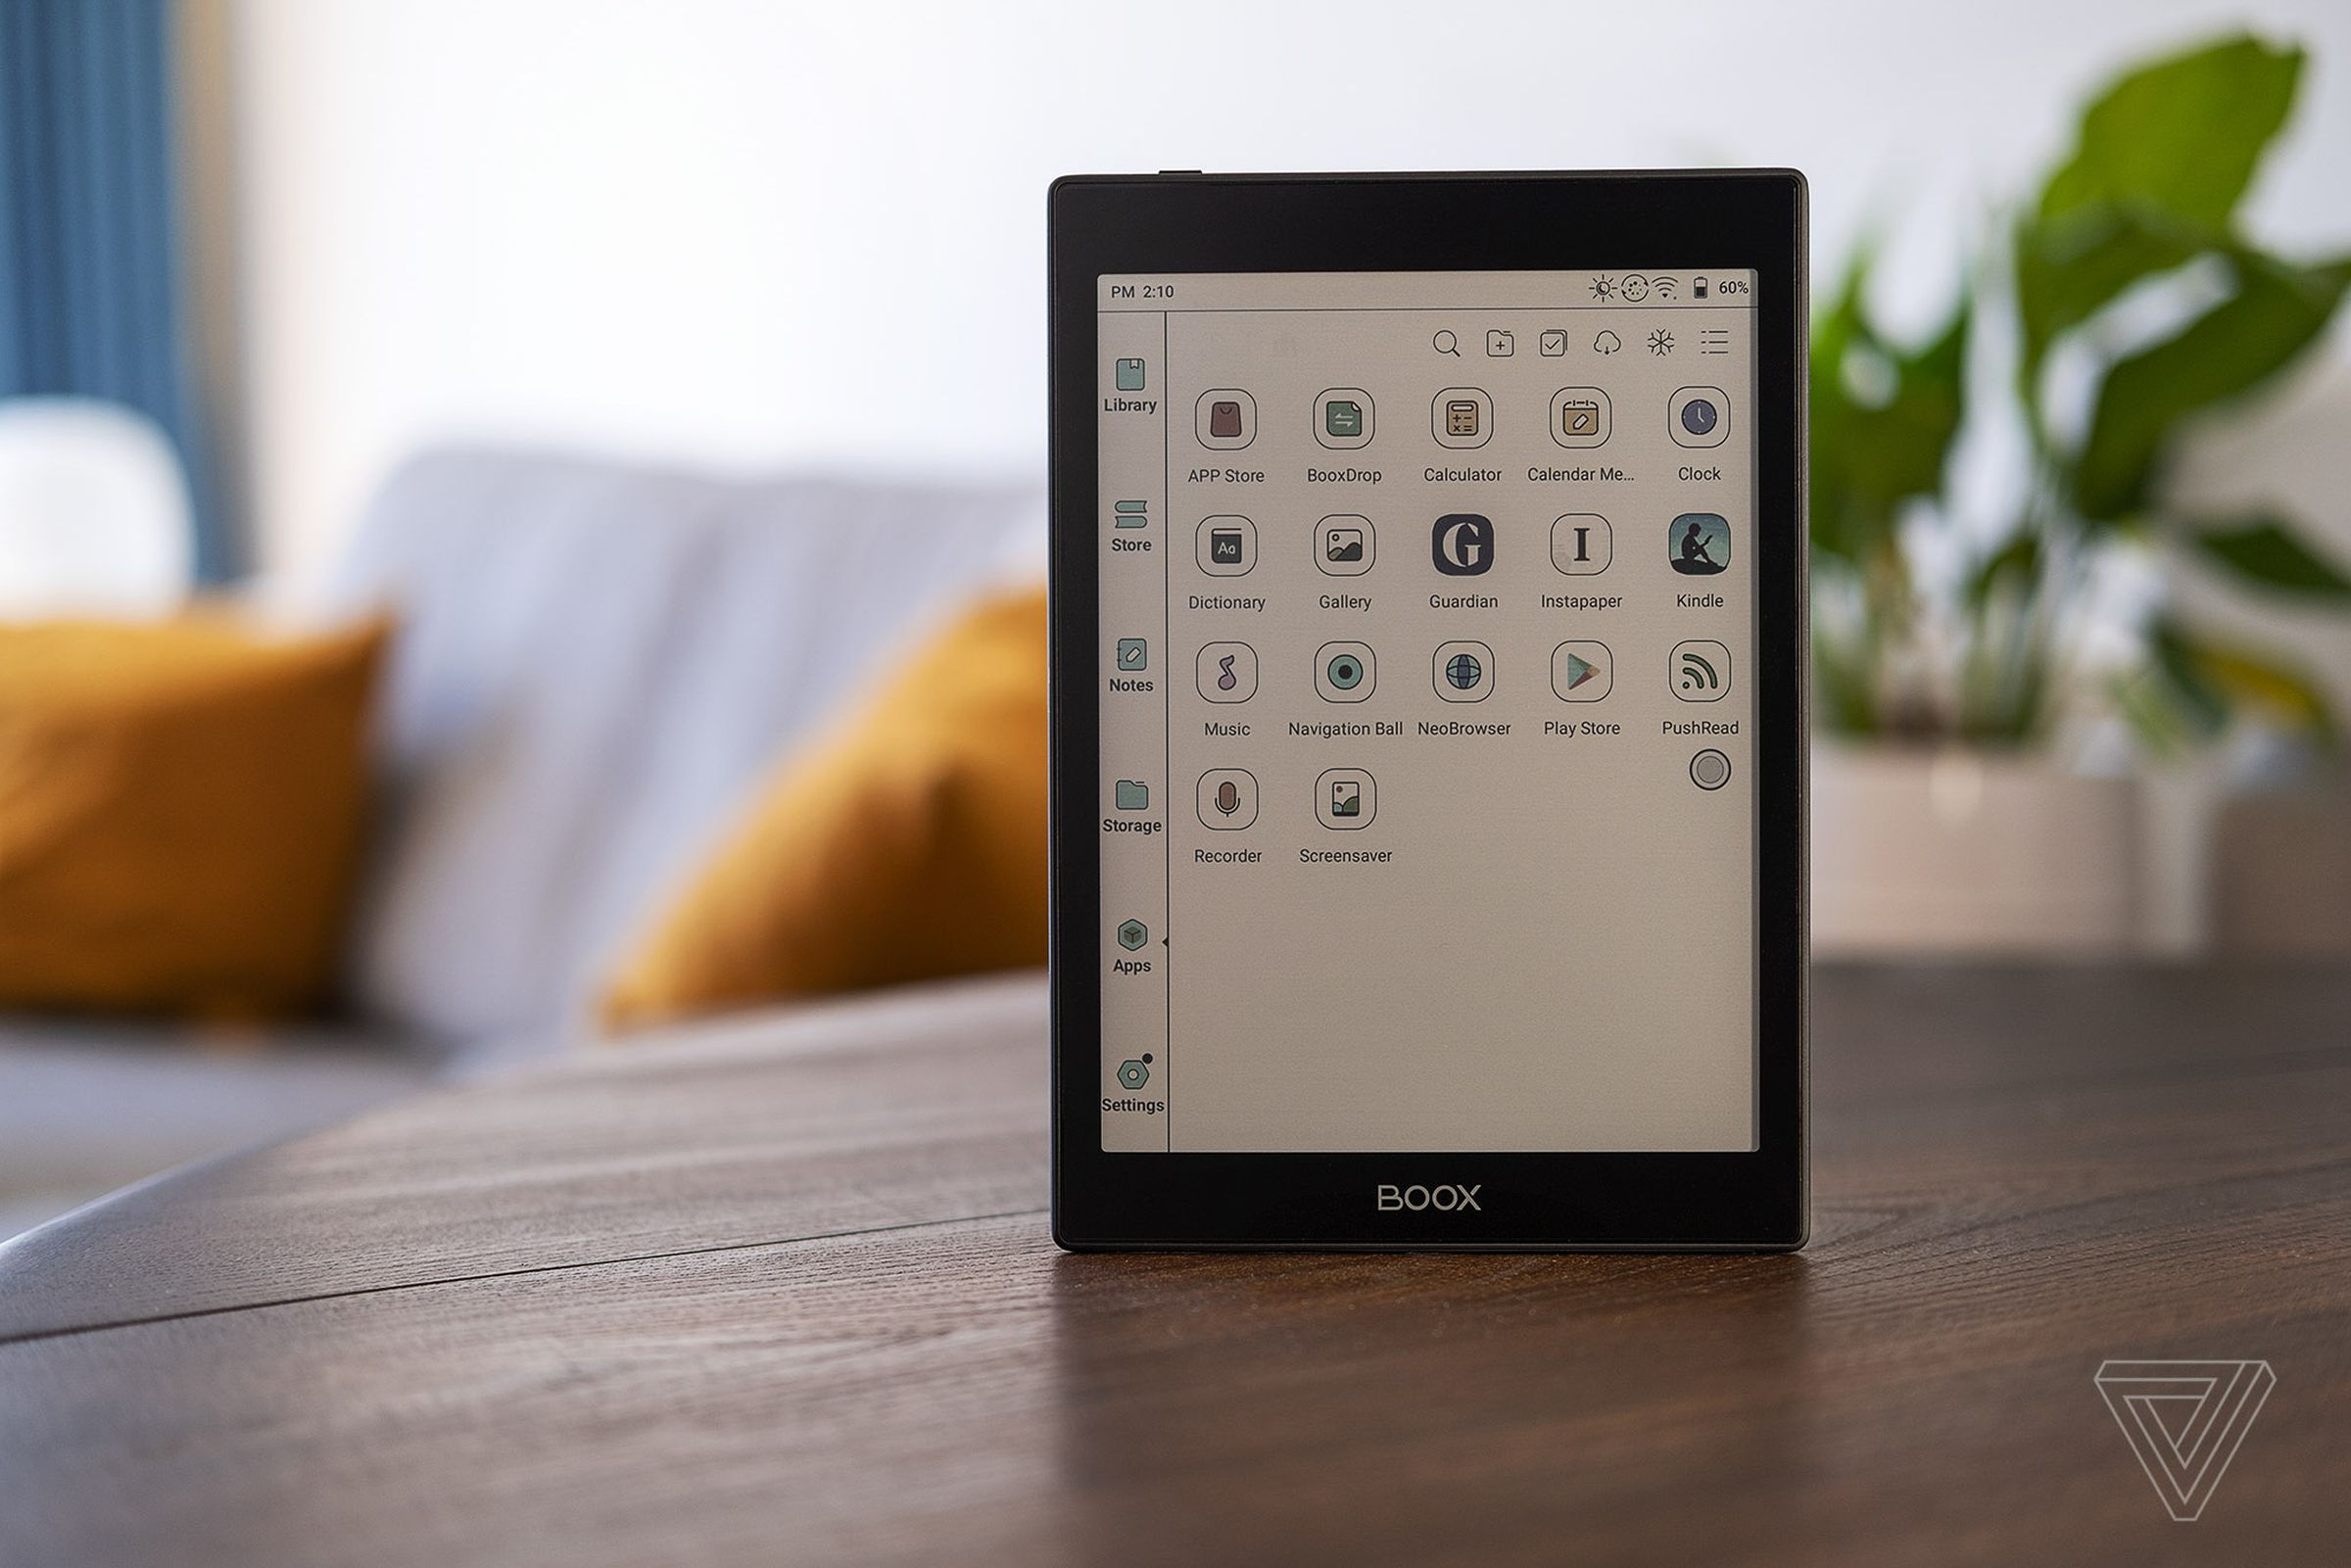 It’s perfectly possible to download and use the Kindle app alongside other Android apps.